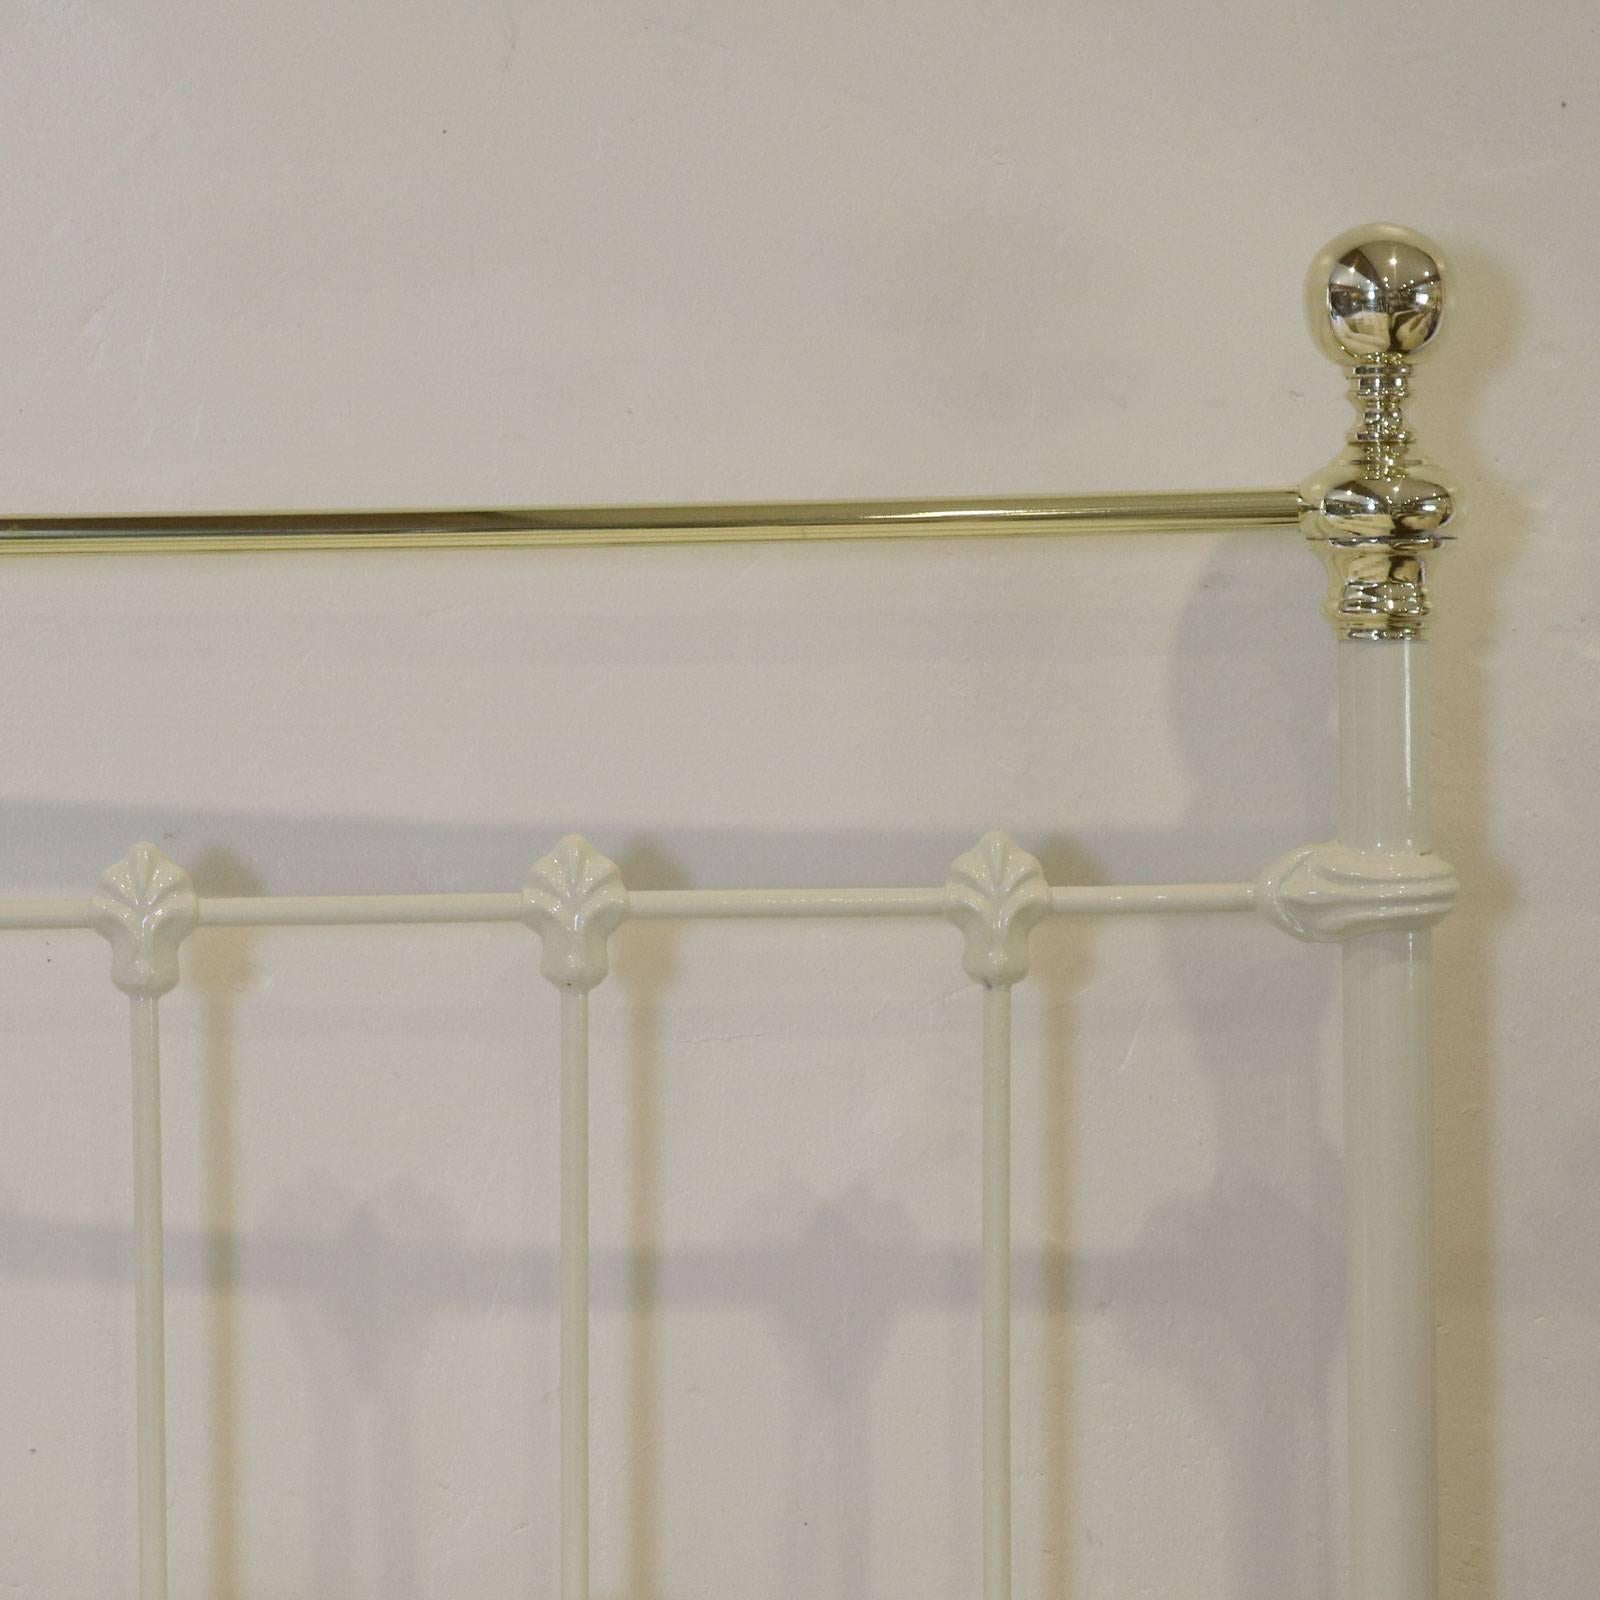 Brass and Iron Bed in Cream, MK78 1